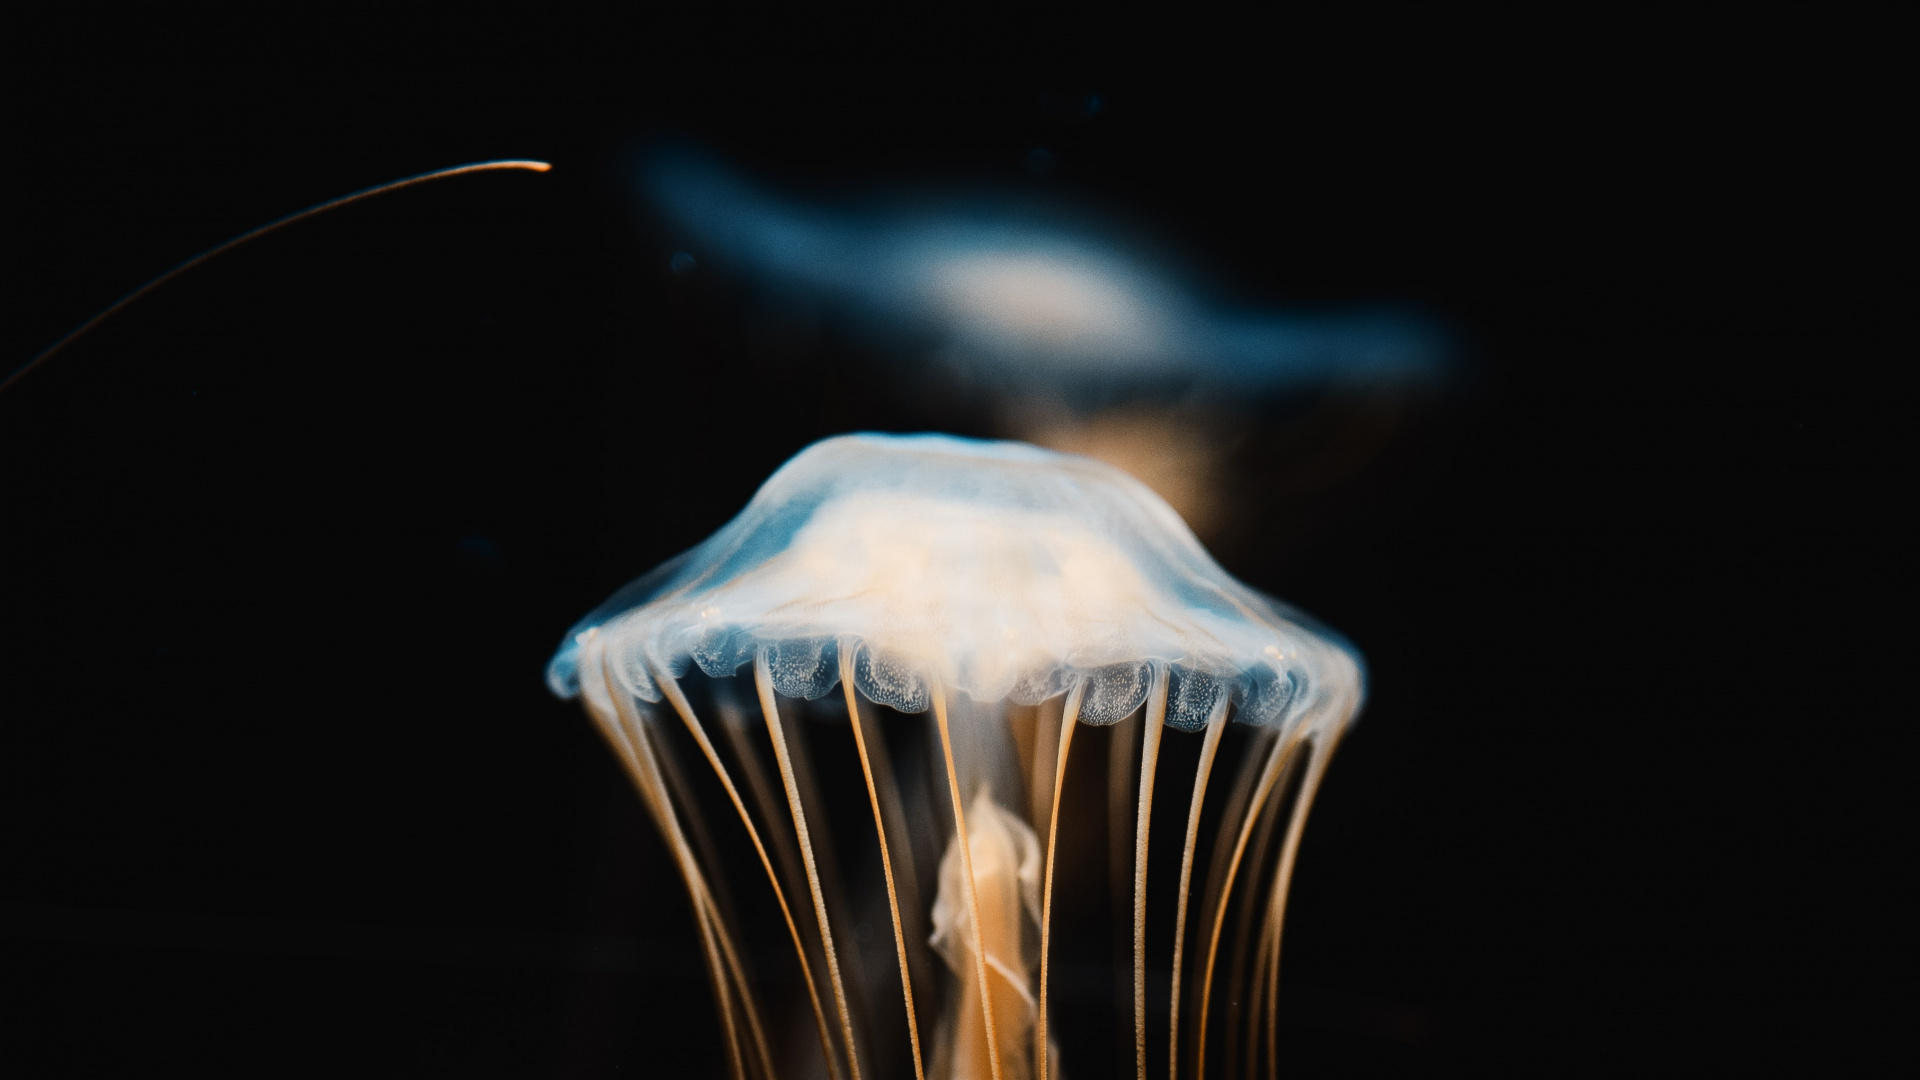 Blue and White Jellyfish in Dark Room. Wallpaper in 1920x1080 Resolution